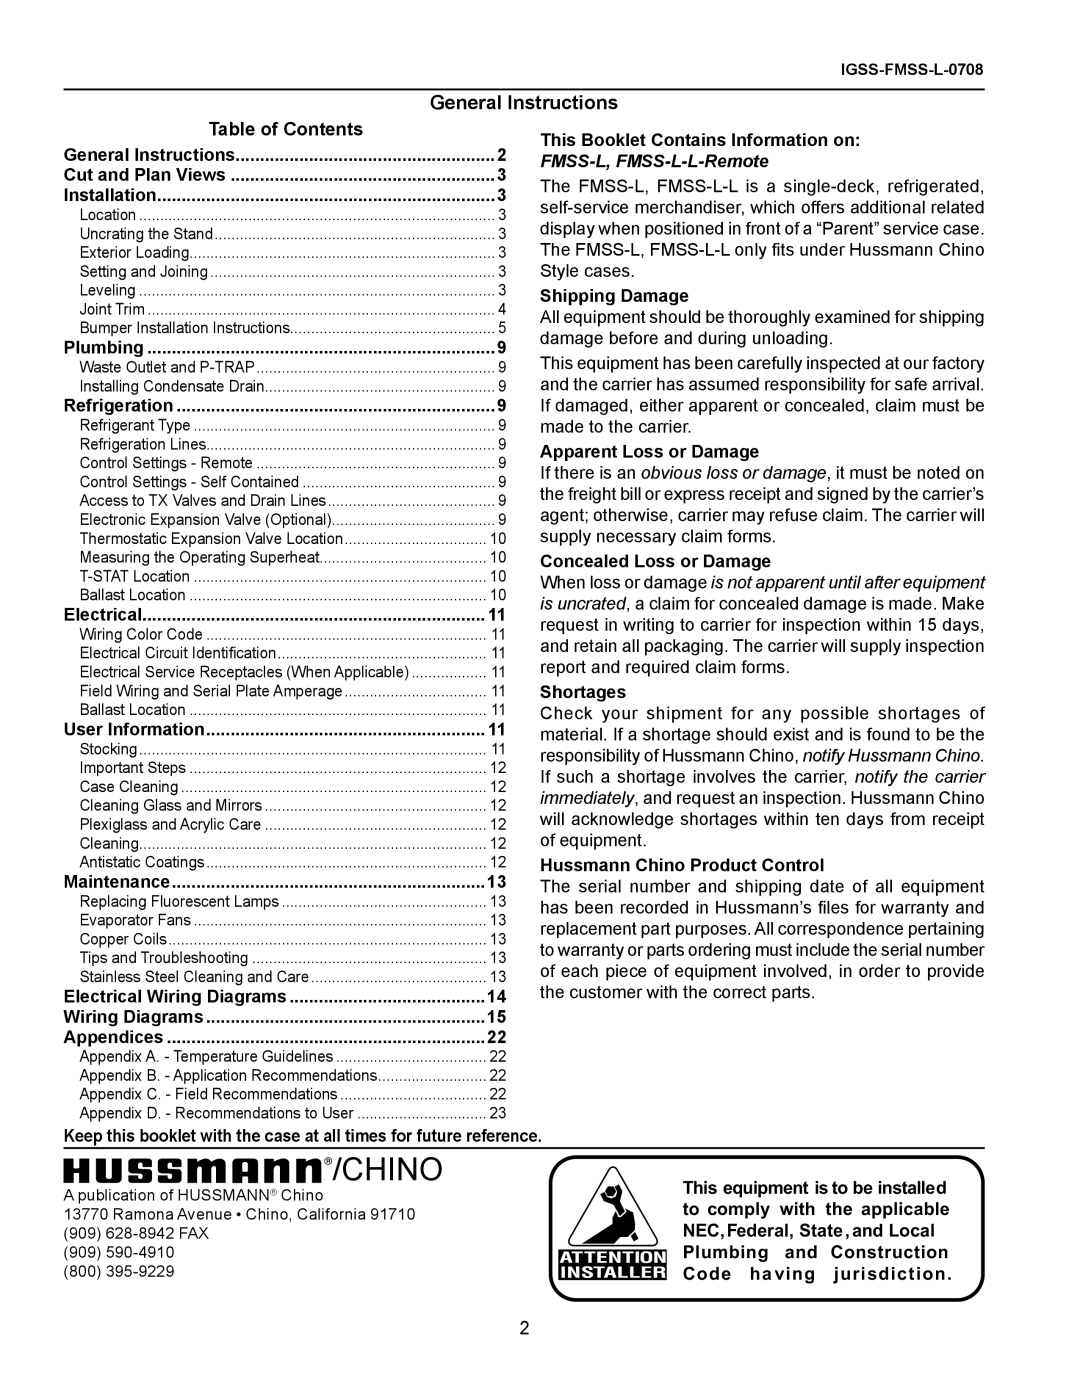 hussman FMSS-L General Instructions, Table of Contents, Chino, This Booklet Contains Information on, Shipping Damage 